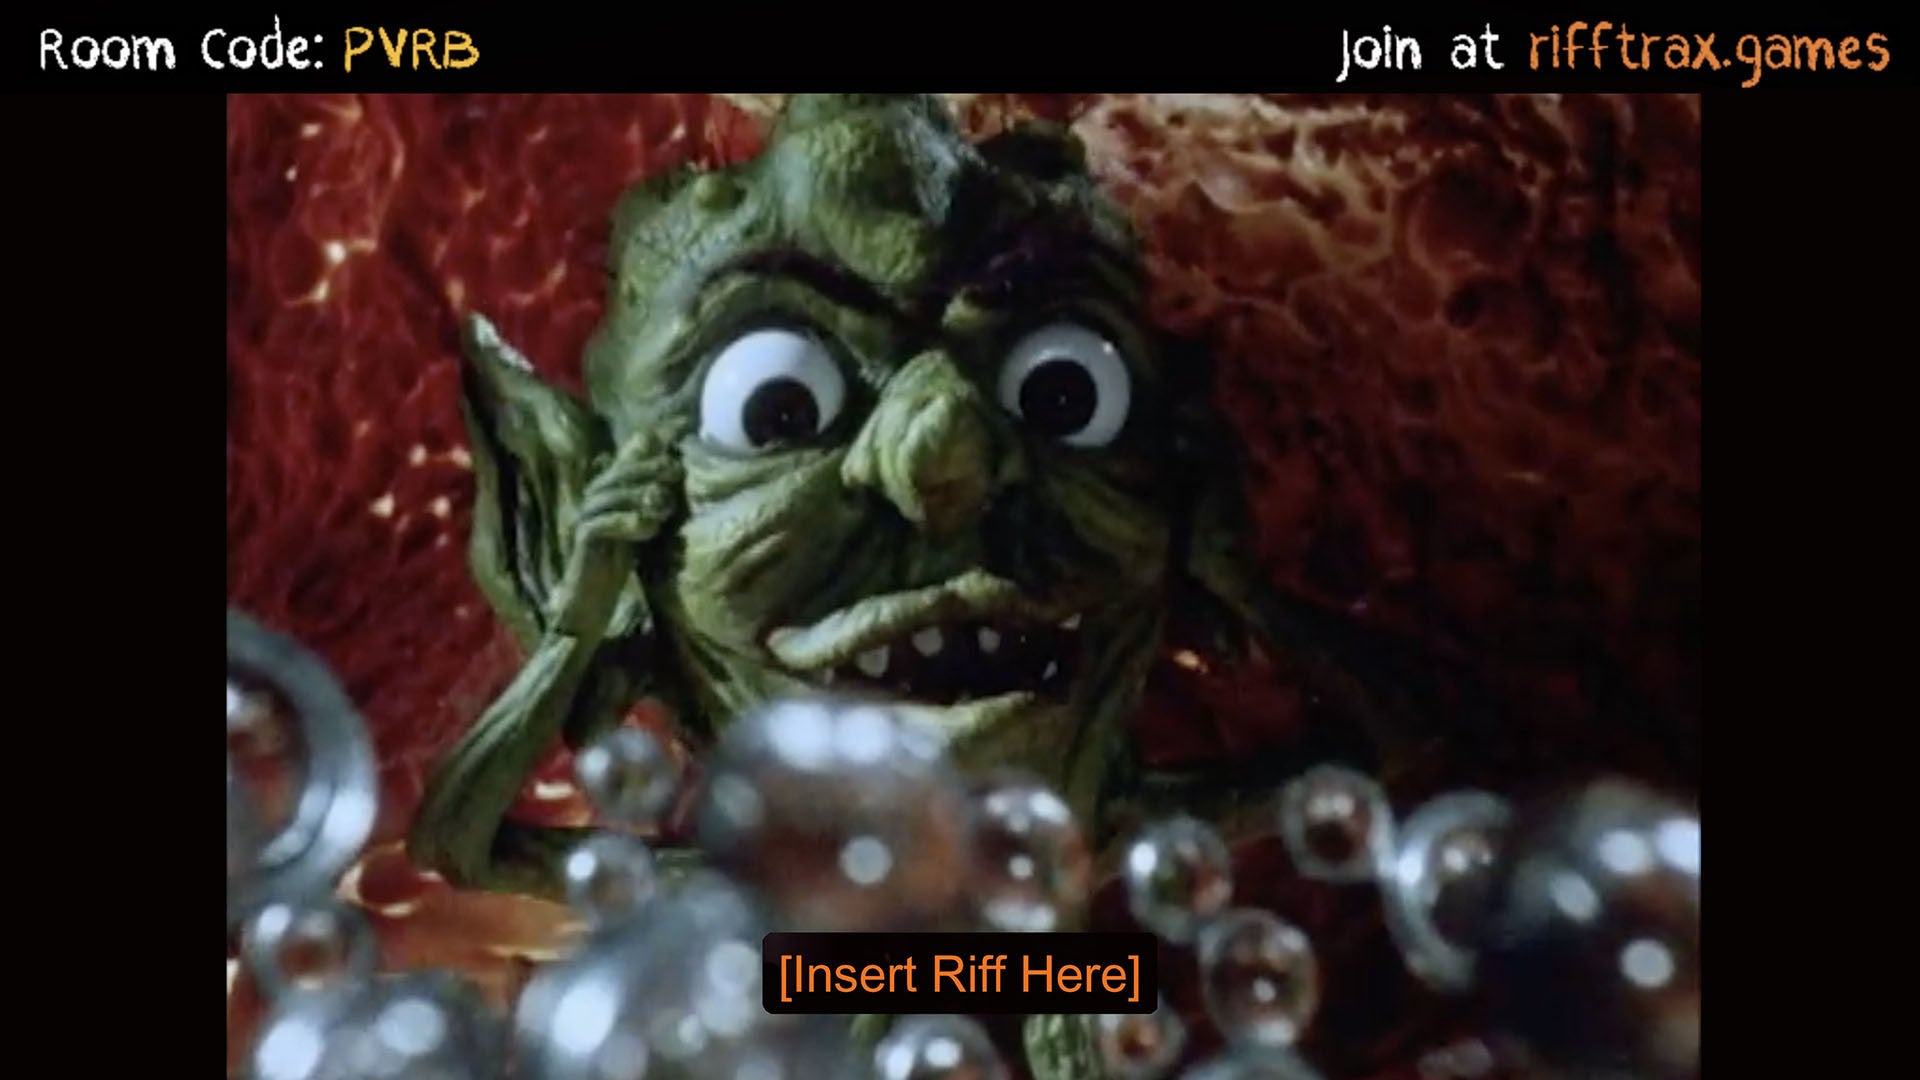 A terrible goblin in a movie with an '[Insert Riff Here]' prompt in a RiffTrax: The Game screenshots.